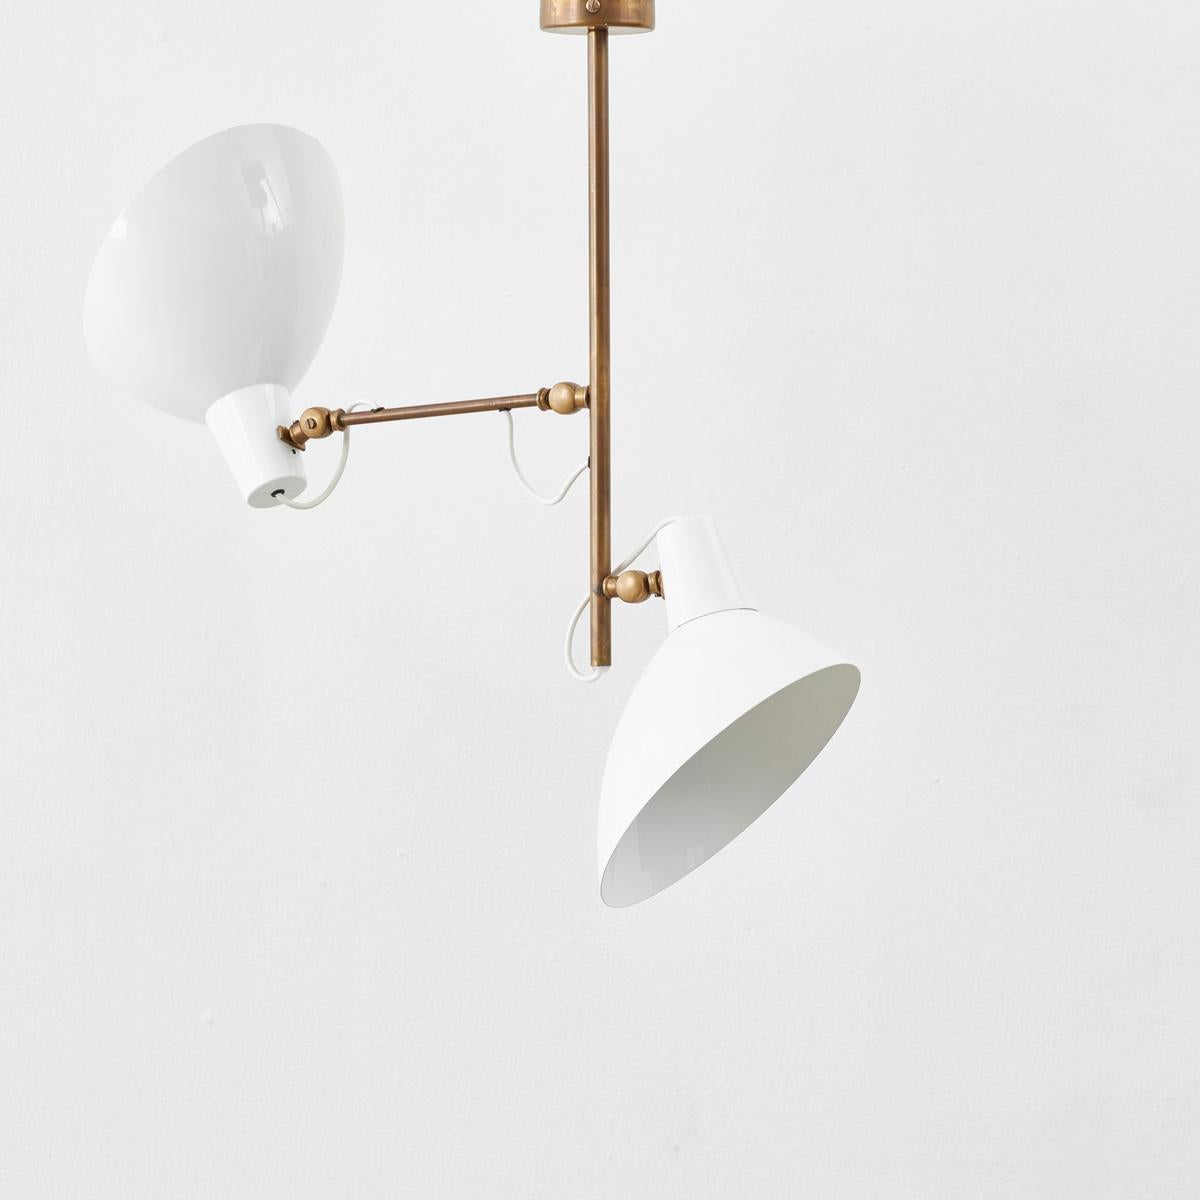 Bifurcating out from the stem of this ceiling light are two cupped shades, reminiscent of Calla lilies. Pointed in opposing directions the shades project a warm glow across any room.